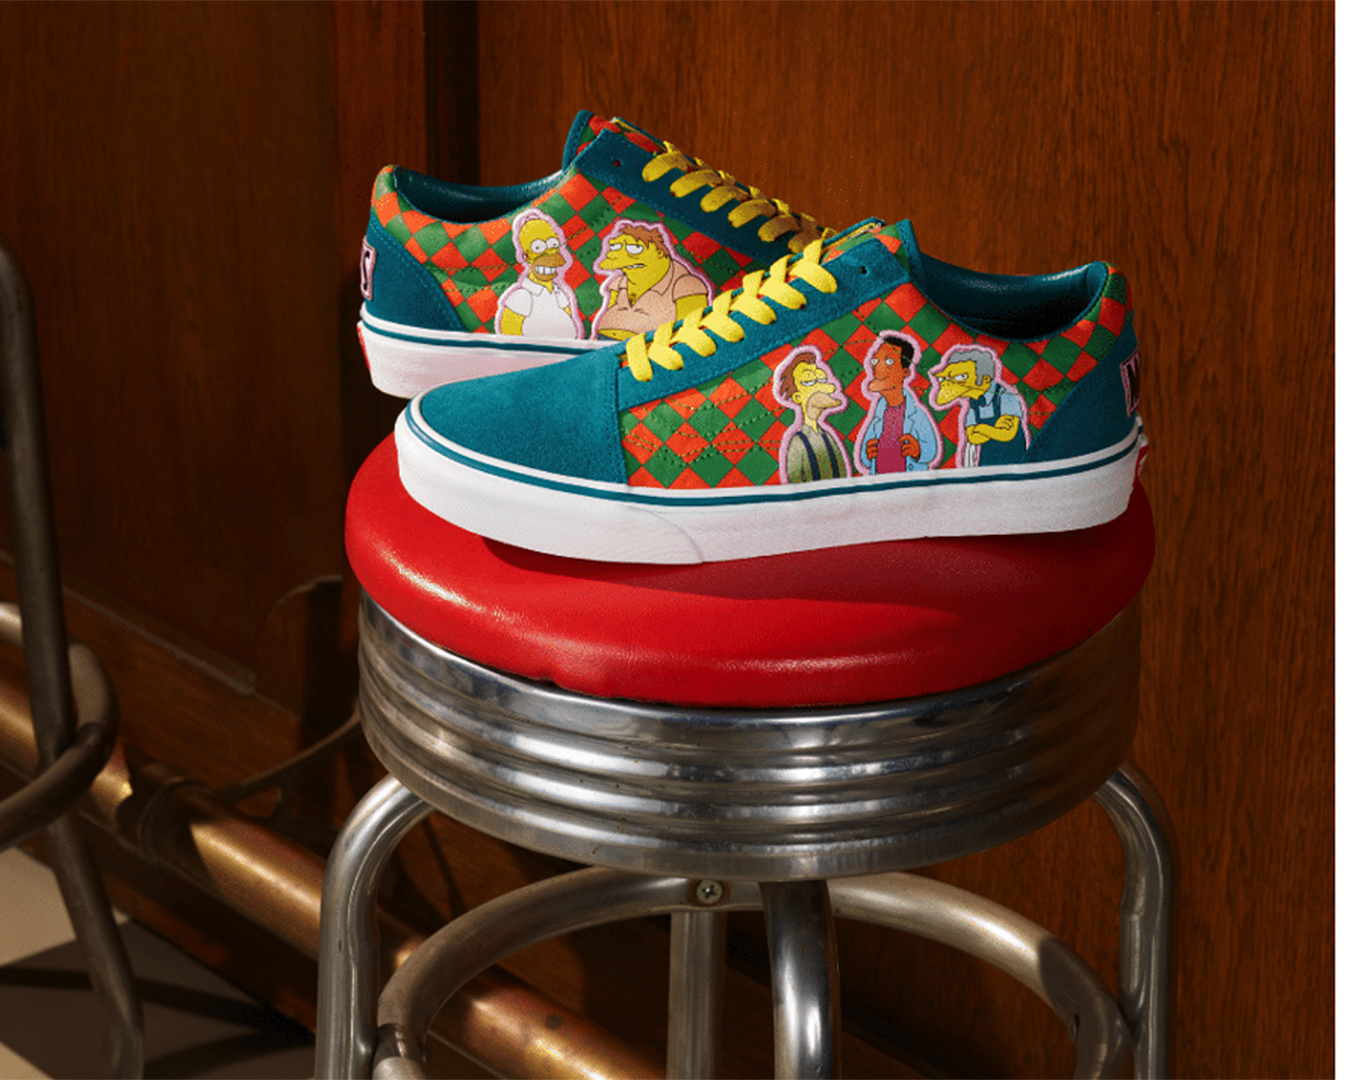 Vans Lace-up high top featuring reprobates from Moe's tavern on the sides.